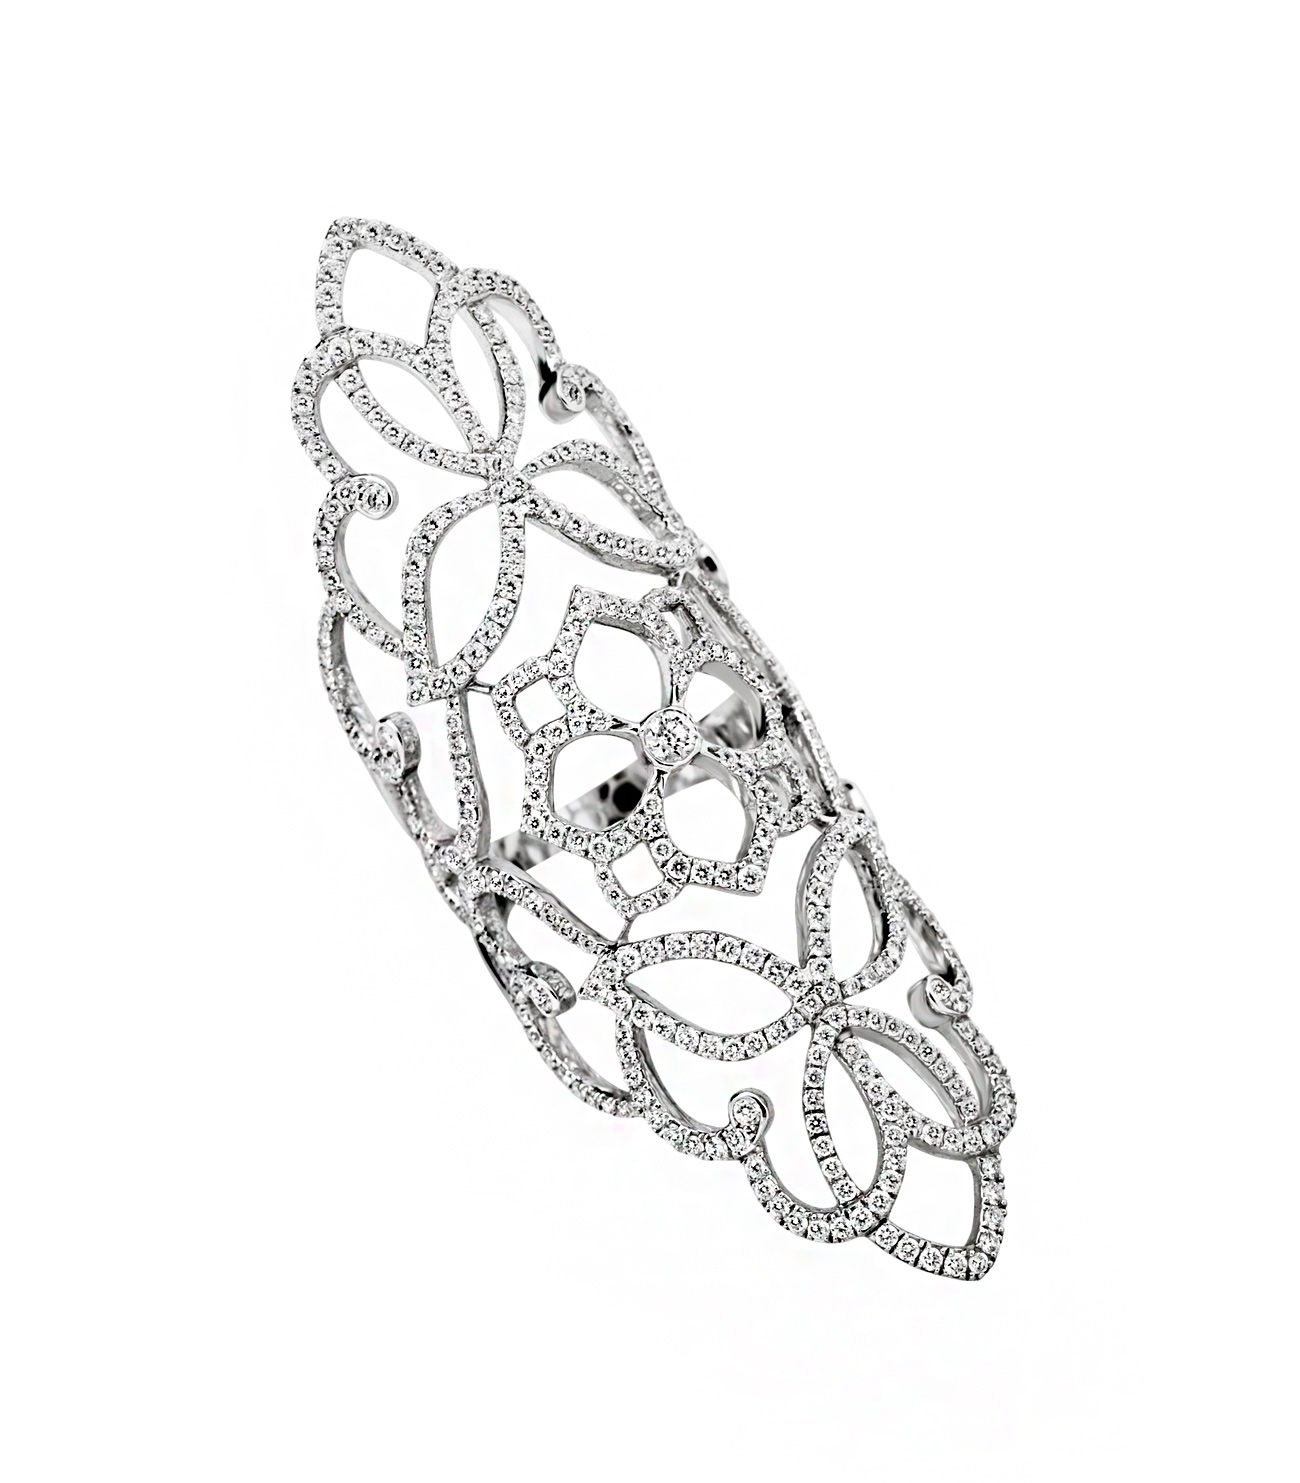 Hot Spring/Summer 2016 Trend: Lace Jewellery